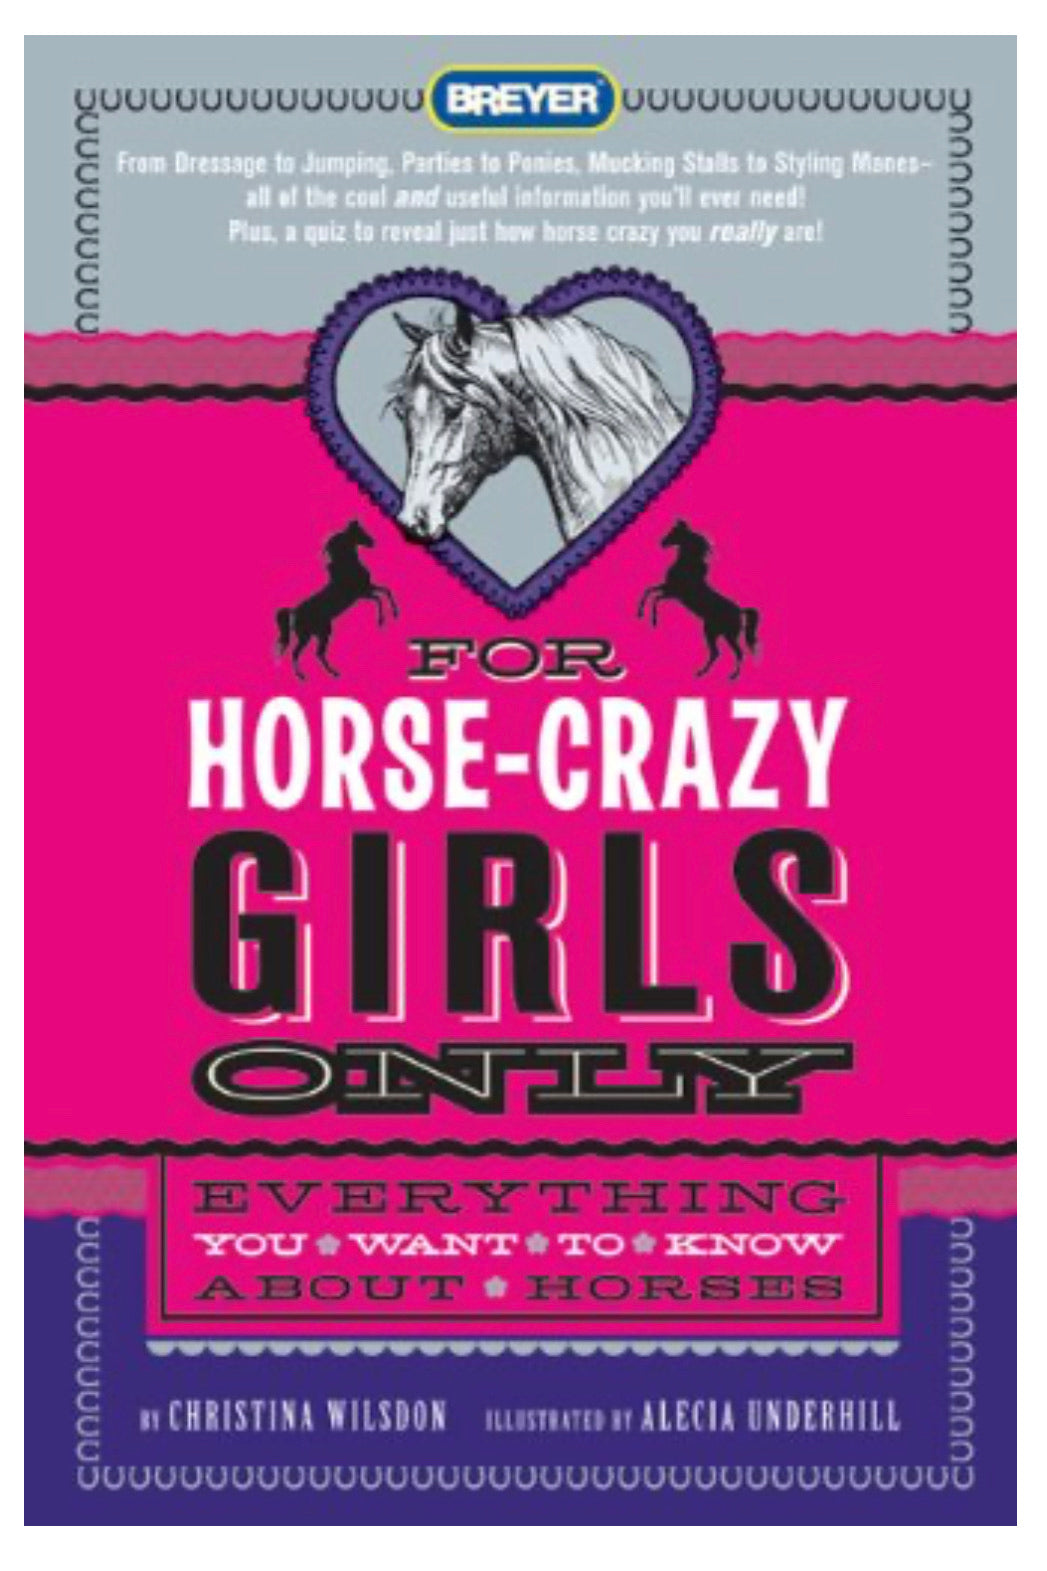 For Horse Crazy Girls Only from Breyer